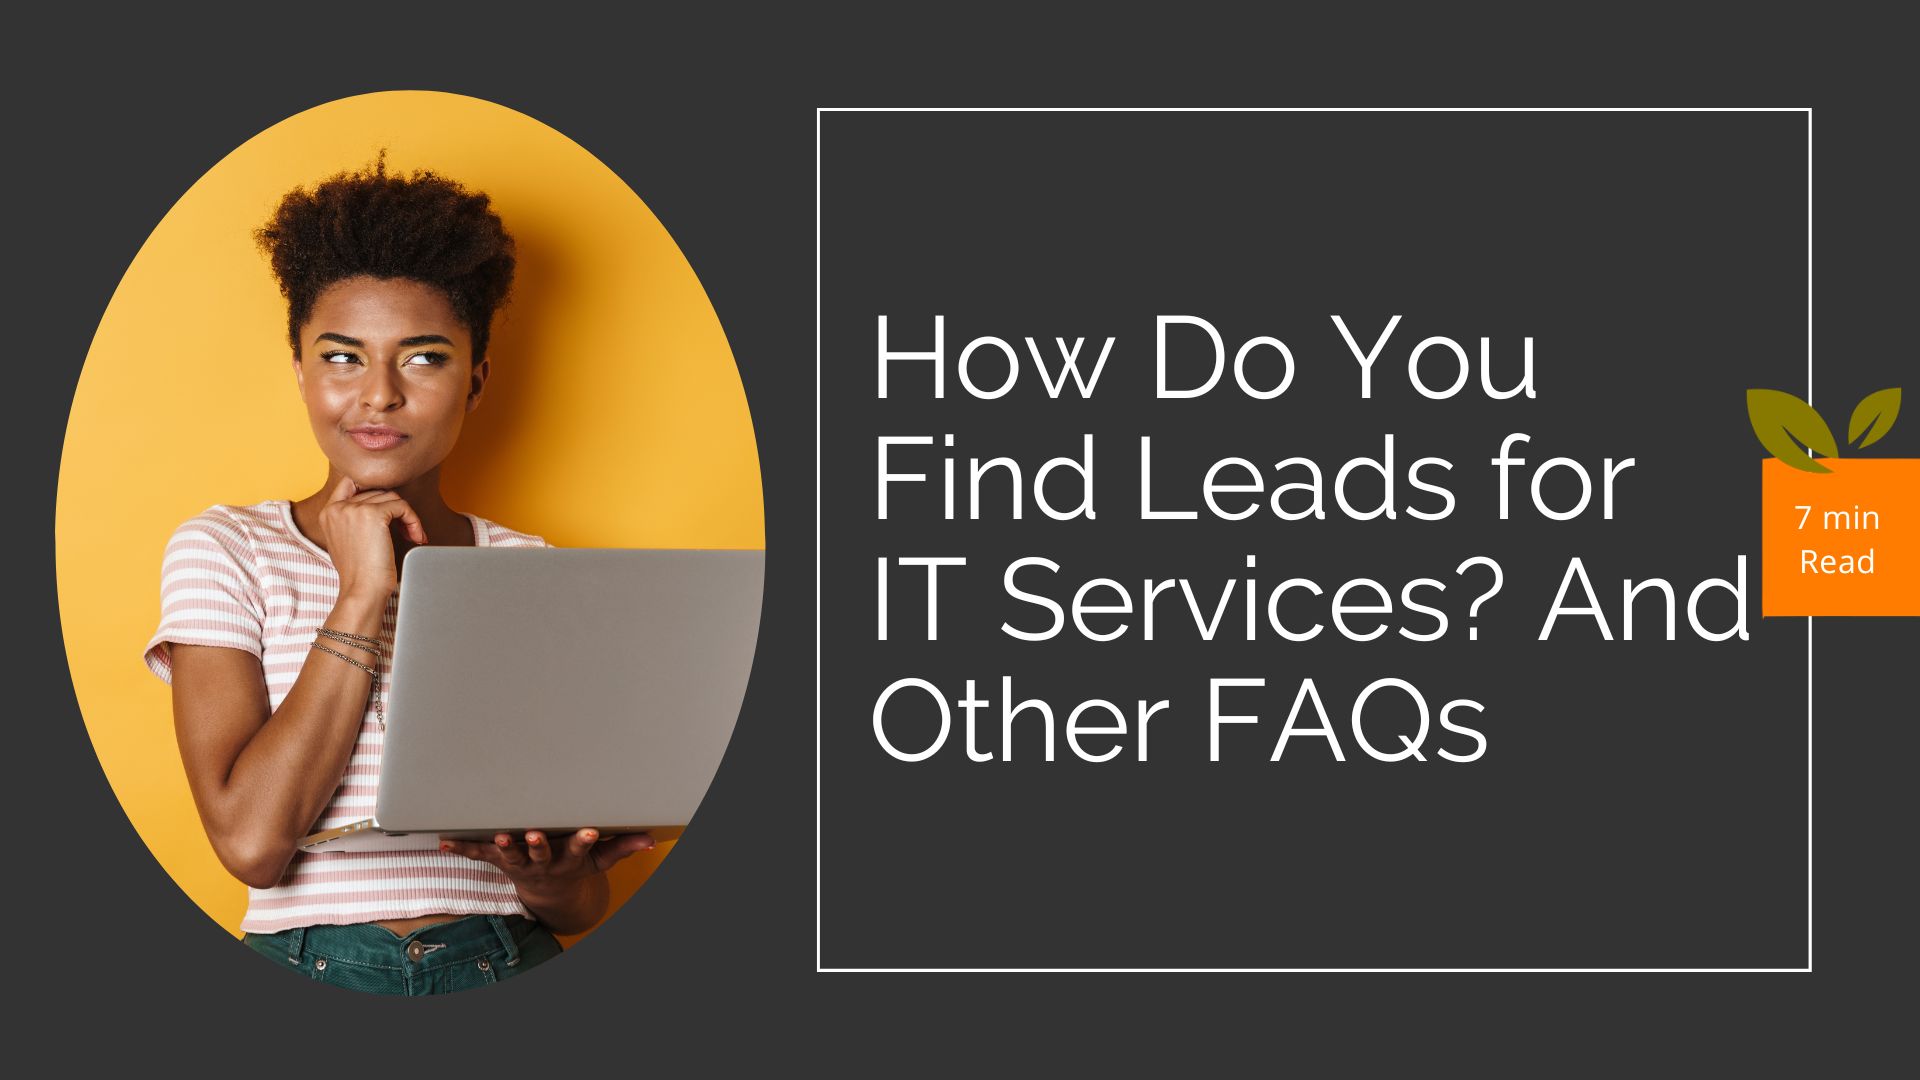 How Do You Find Leads for IT Services?